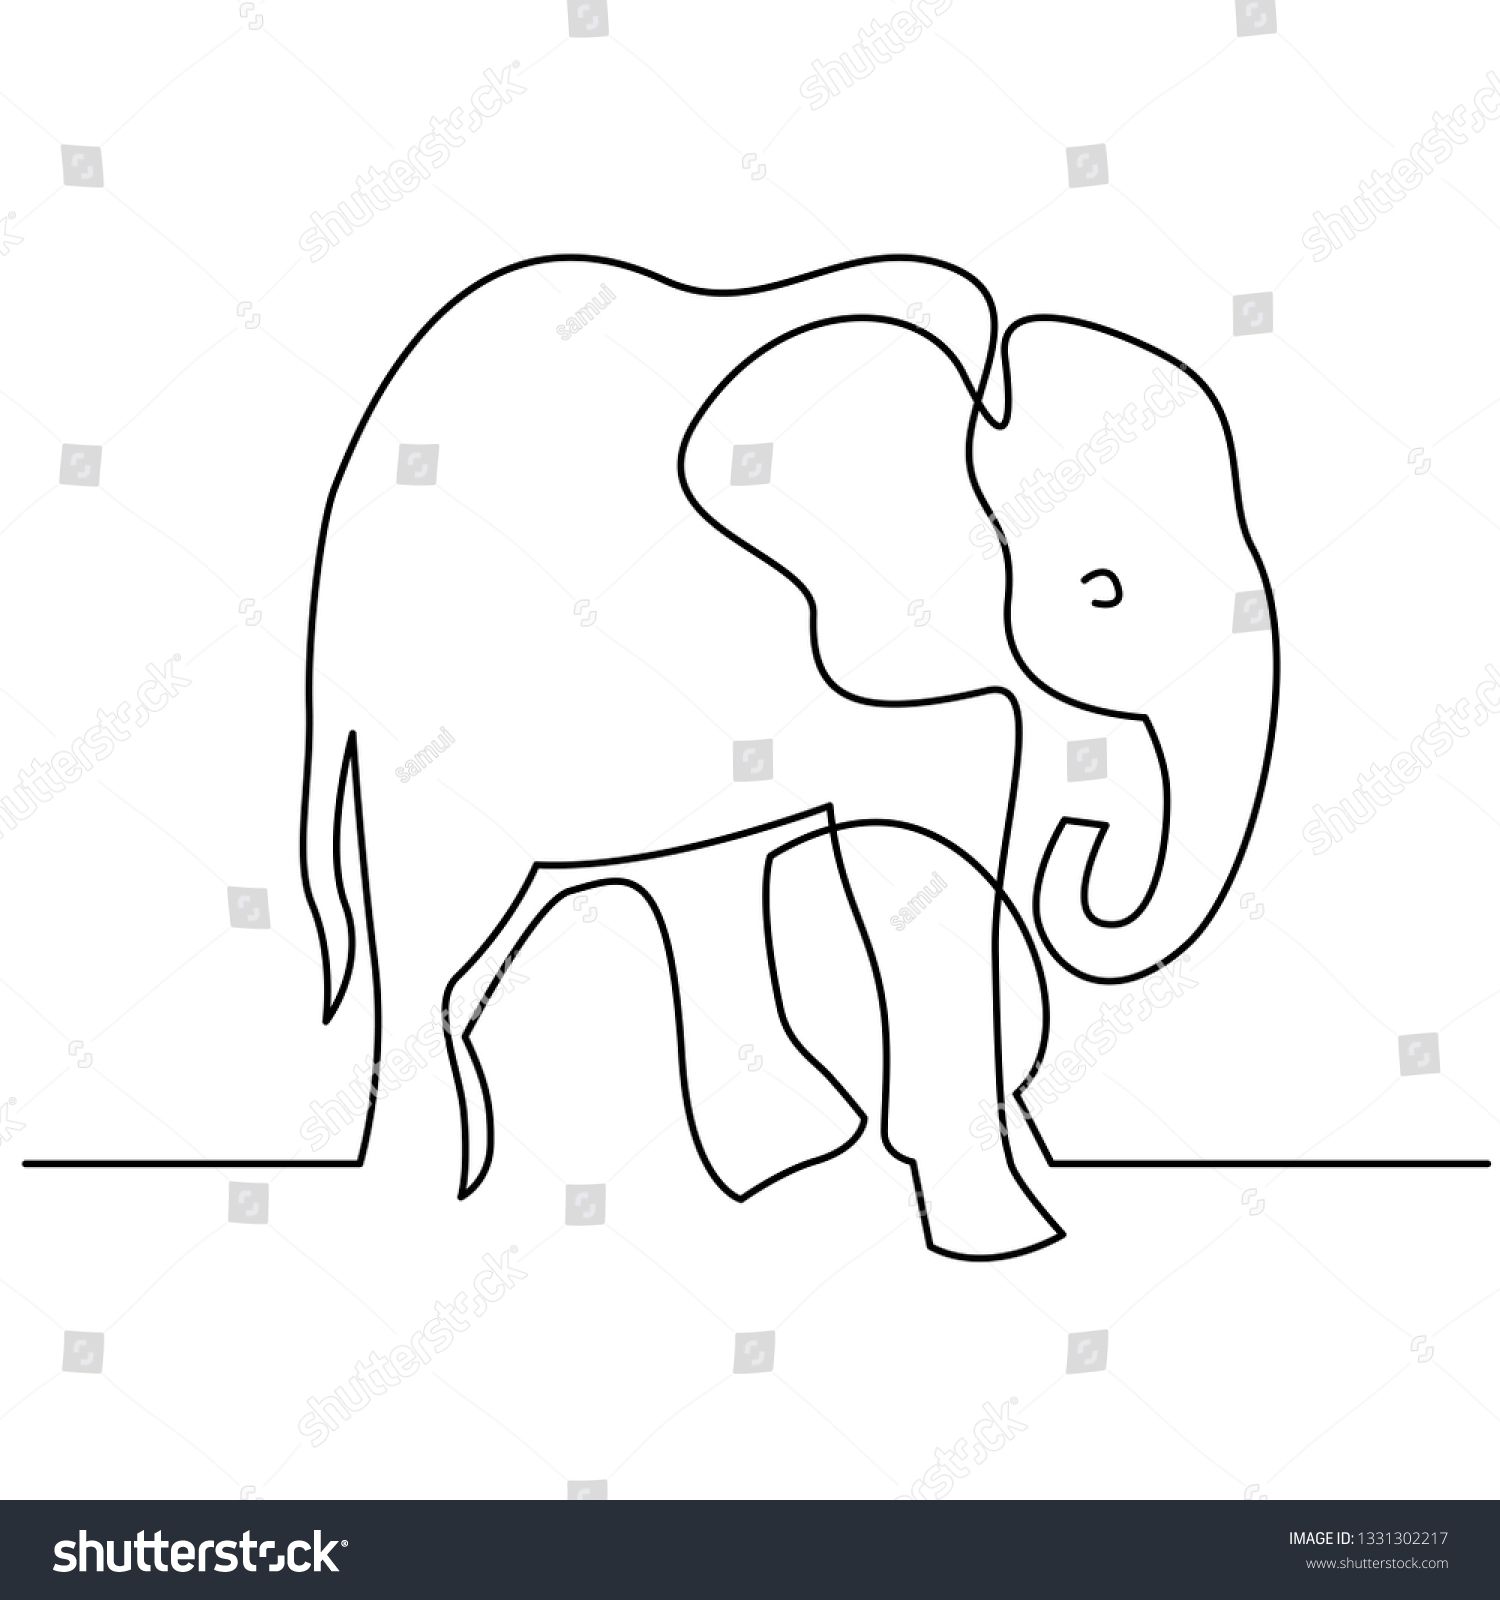 Elephant continuous one line drawings